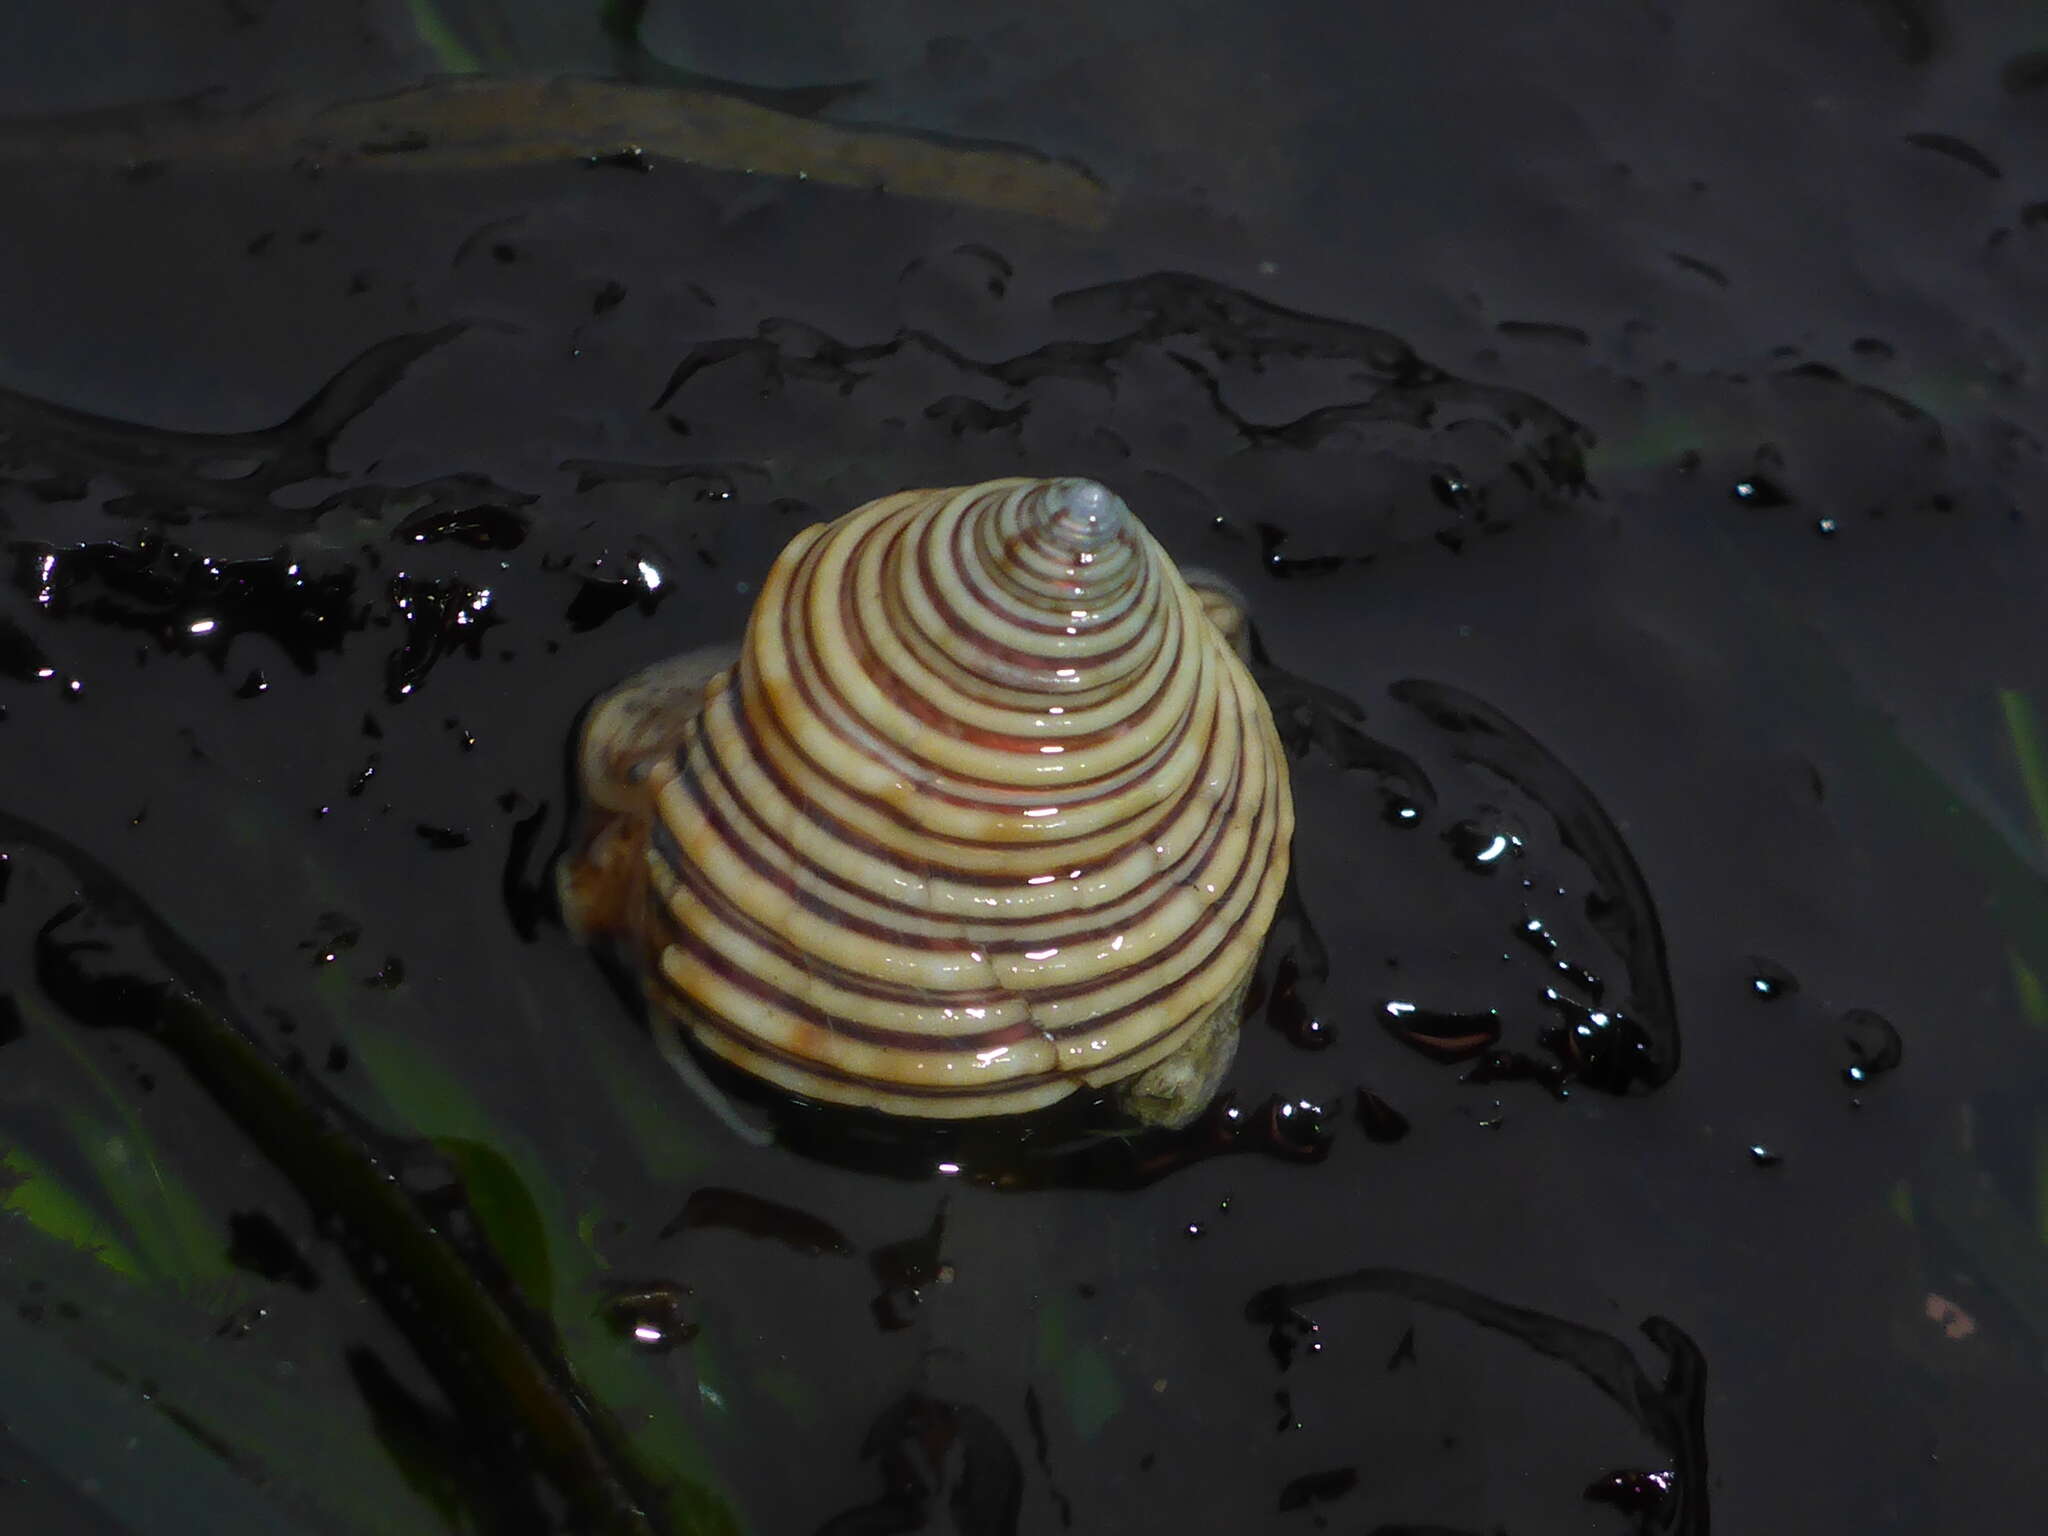 Image of Channeled Top Snail